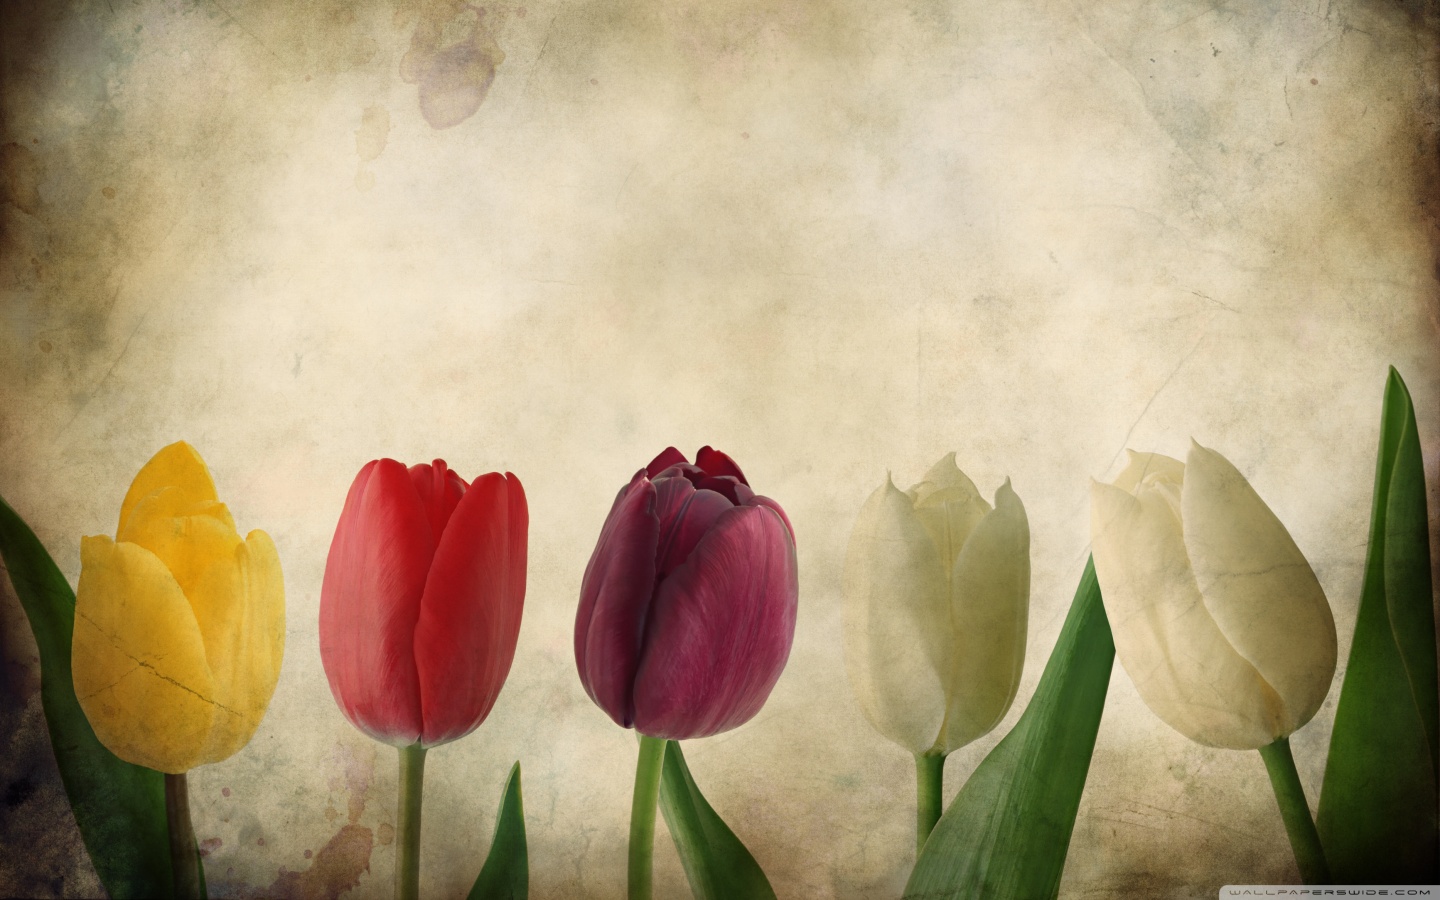 Download wallpaper 938x1668 tulips flowers bouquet pink black iphone  876s6 for parallax hd background